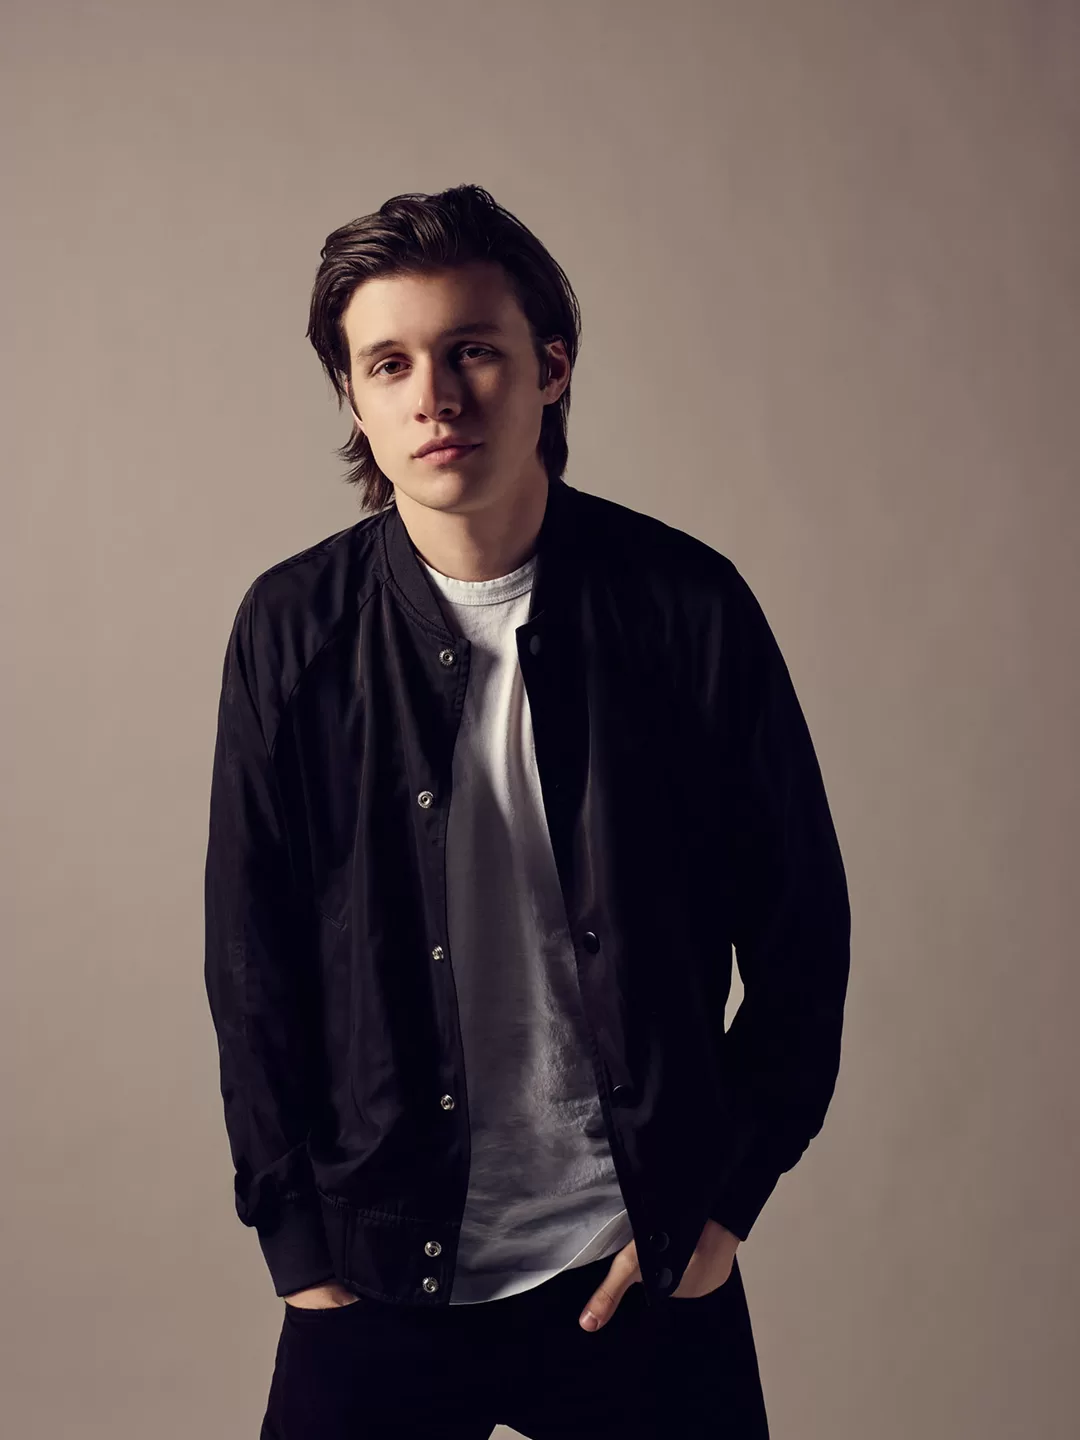 Nick Robinson Movies And TV Shows: Age, Girlfriend, Family, Height, And Biography